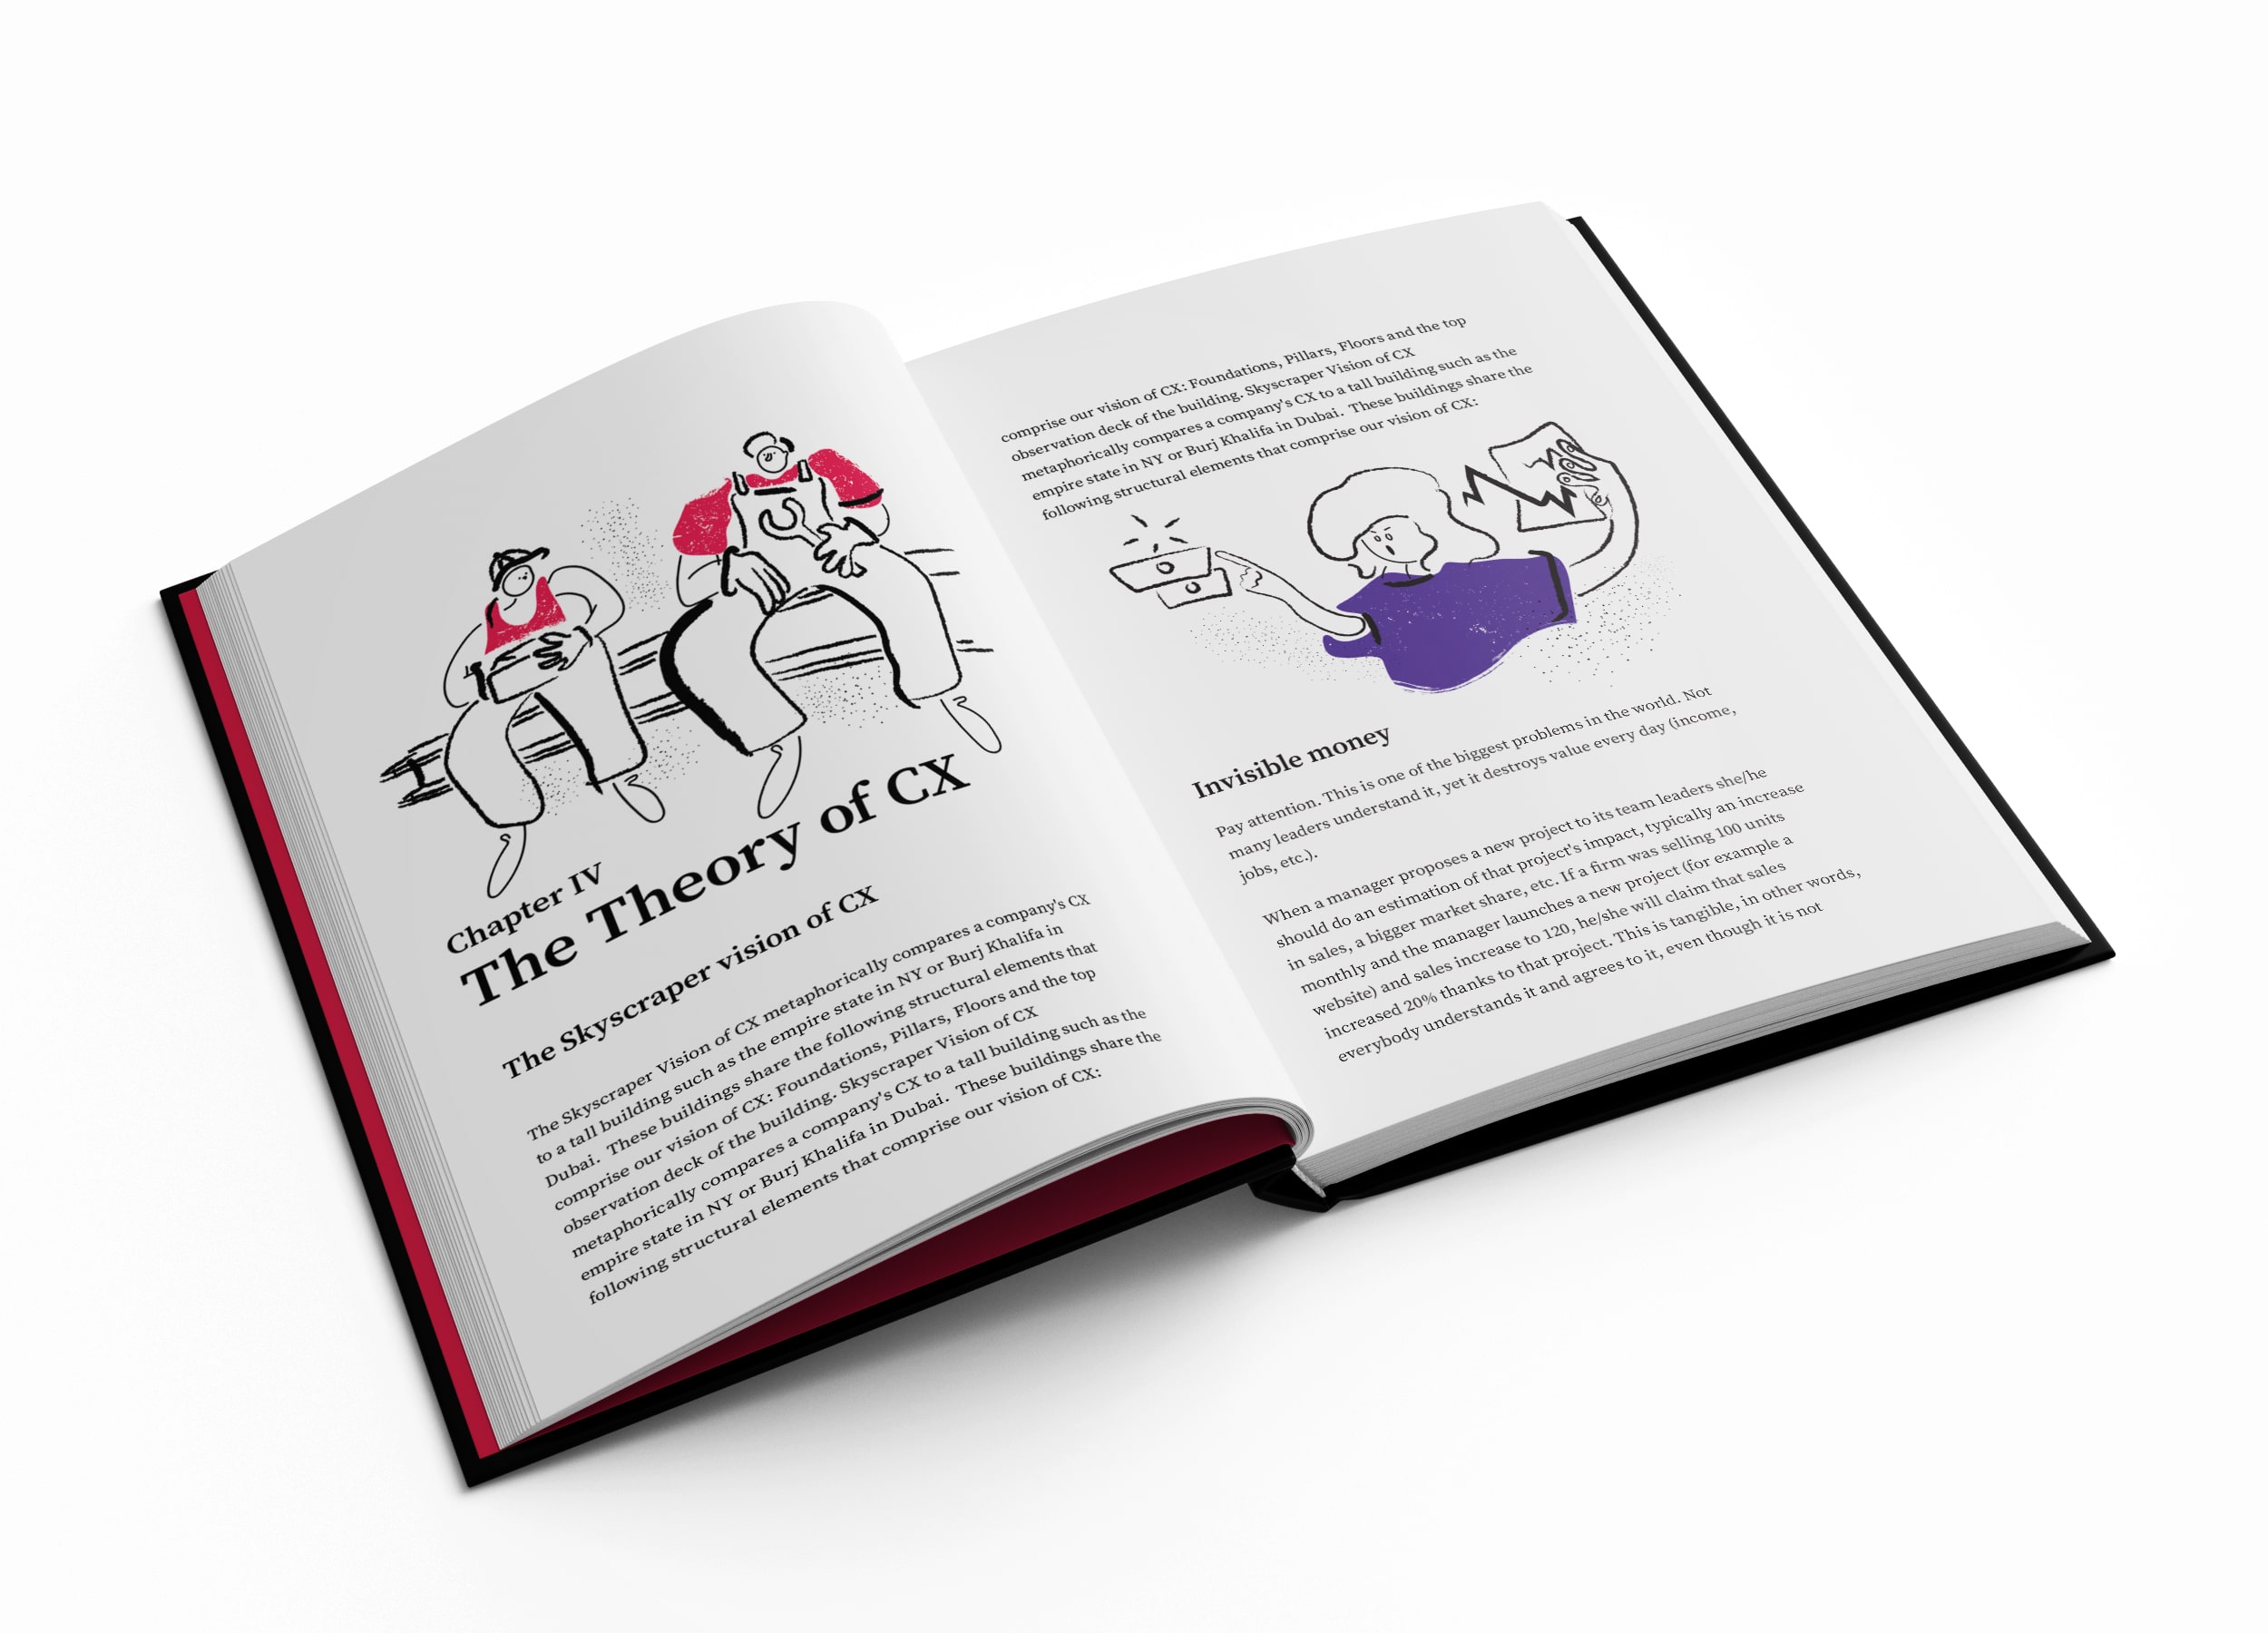 Customer-experience-book-illustrations